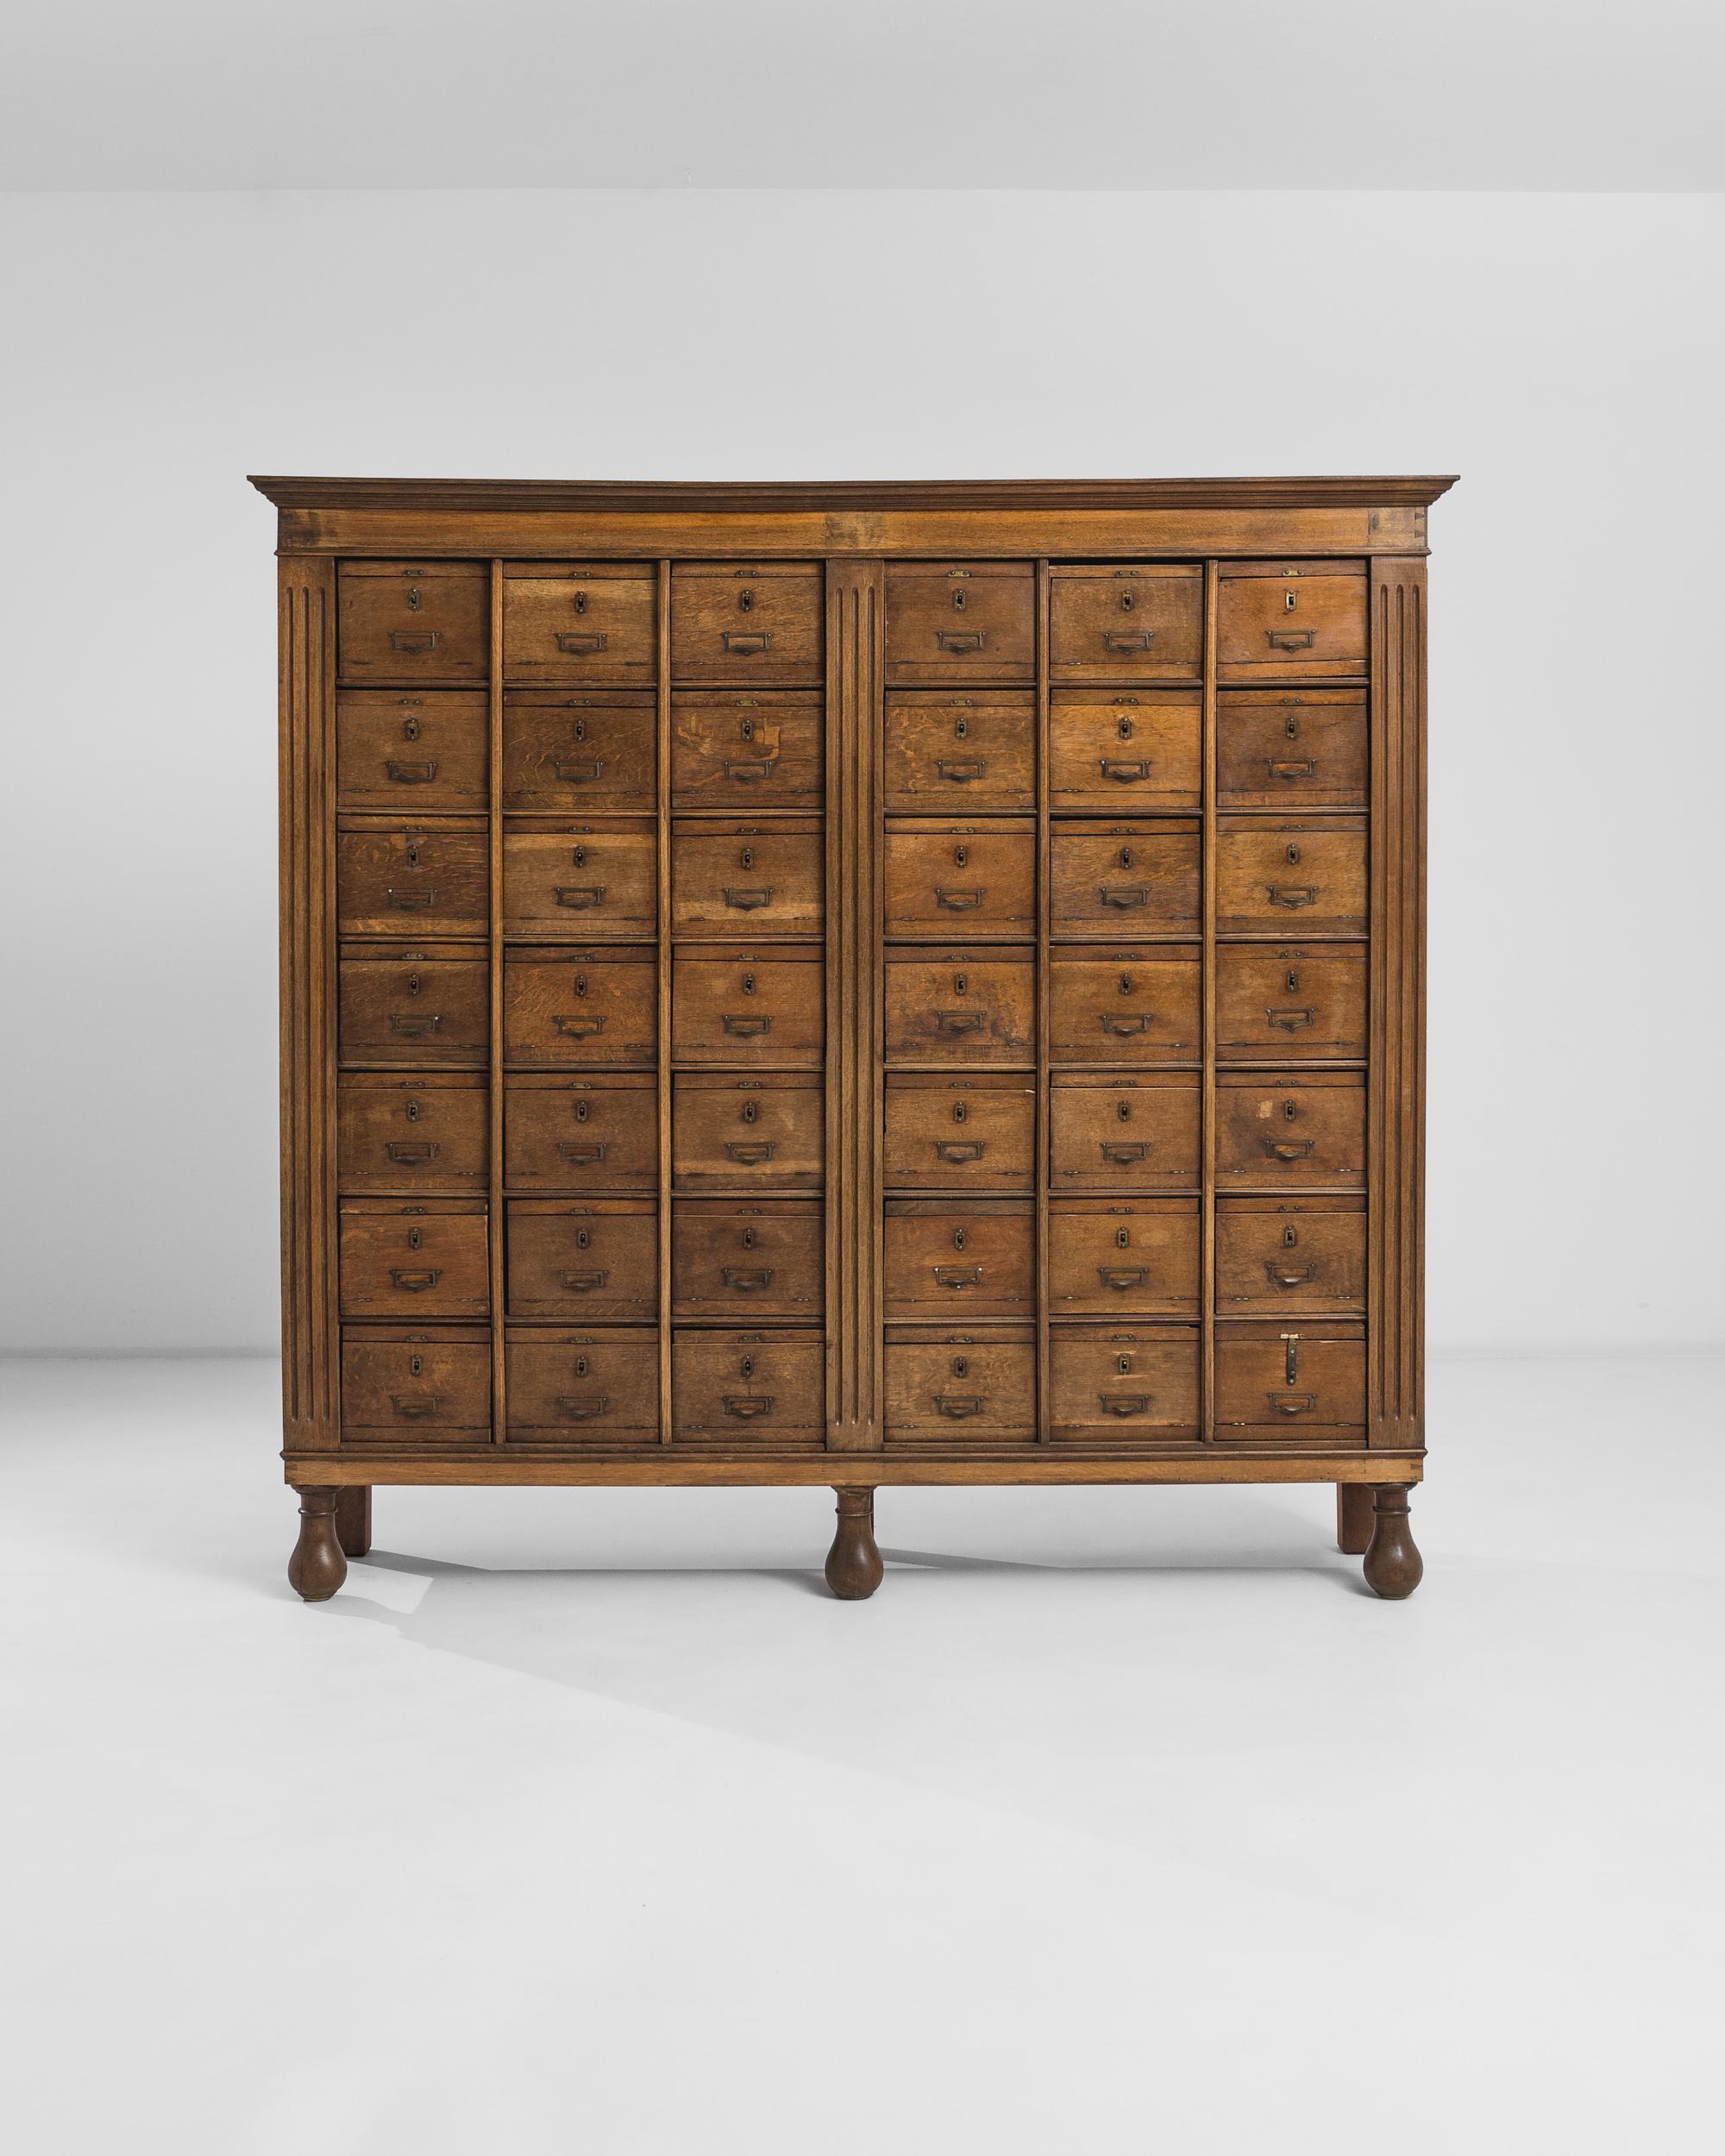 This antique cabinet was produced in France, circa 1900. A large wooden cabinet standing on bun feet, featuring a fluted case and an arrangement of forty-two drawers crowned by a beveled cornice. The piece flaunts a striking natural patina, offering